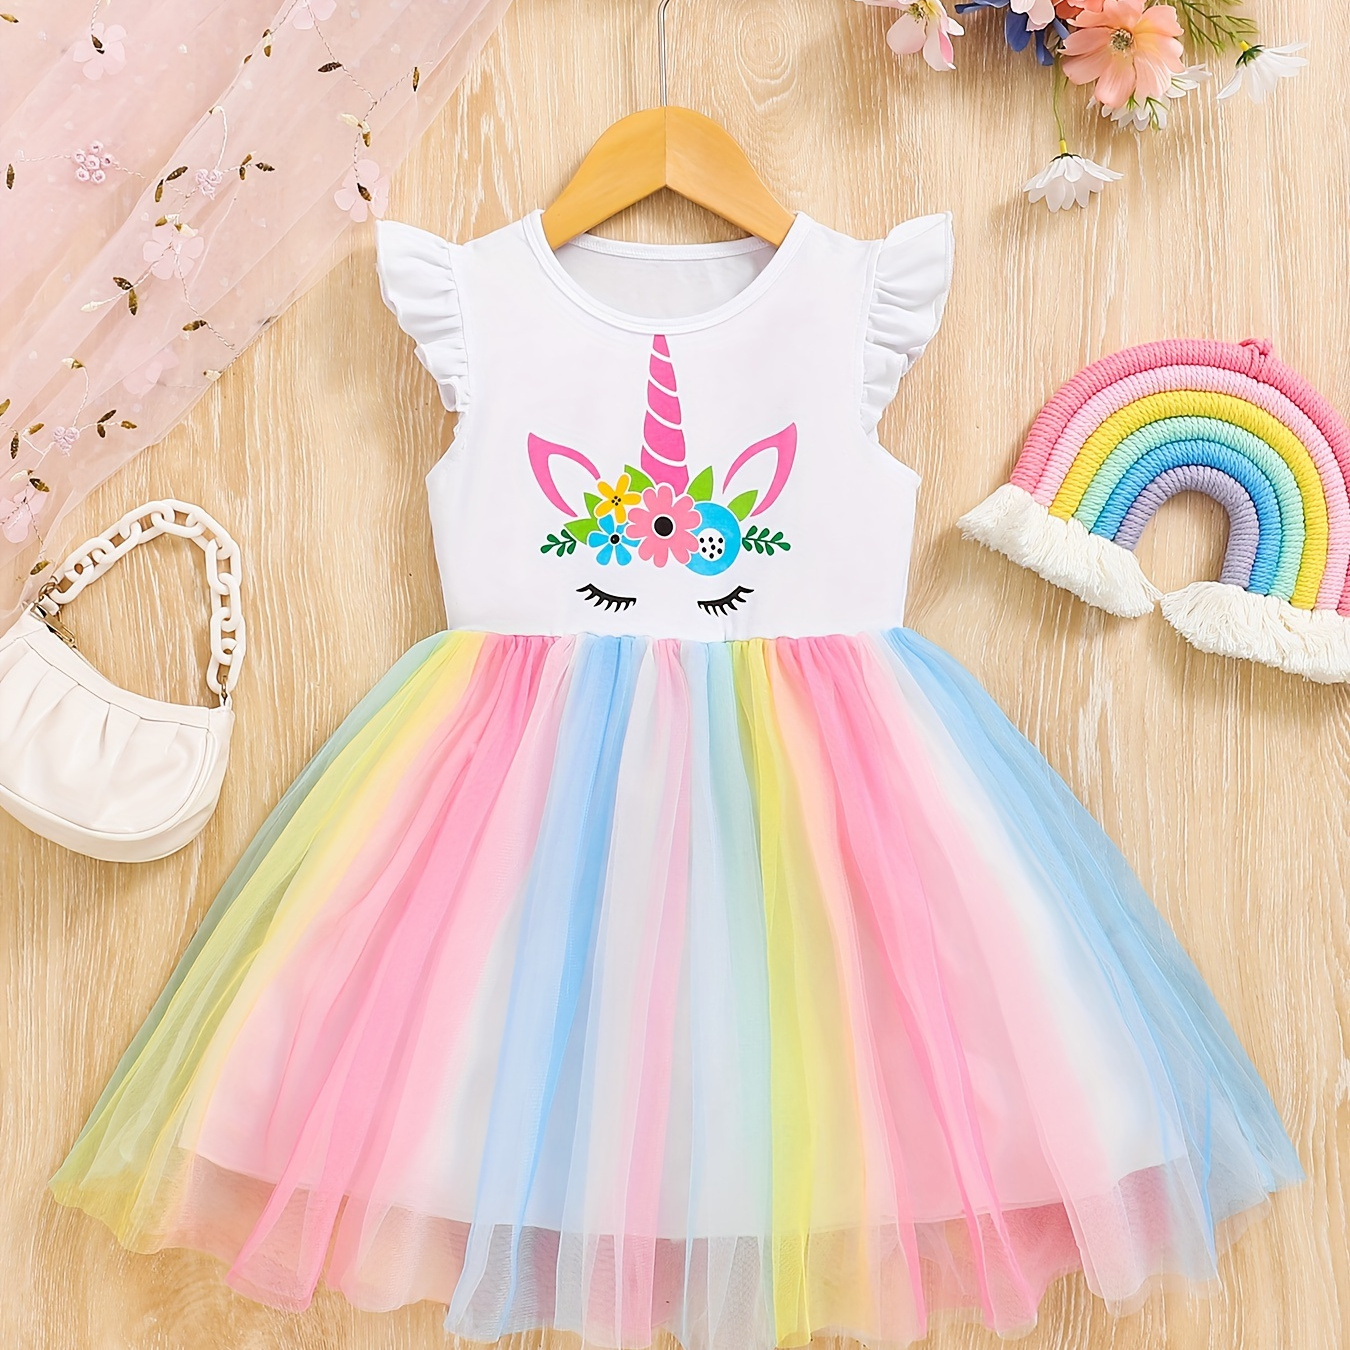 

Cute Girl's Unicorn Cartoon Dress With Flutter Sleeves And Fluffy Rainbow Tulle Party Cute Tutu Dress For Girls